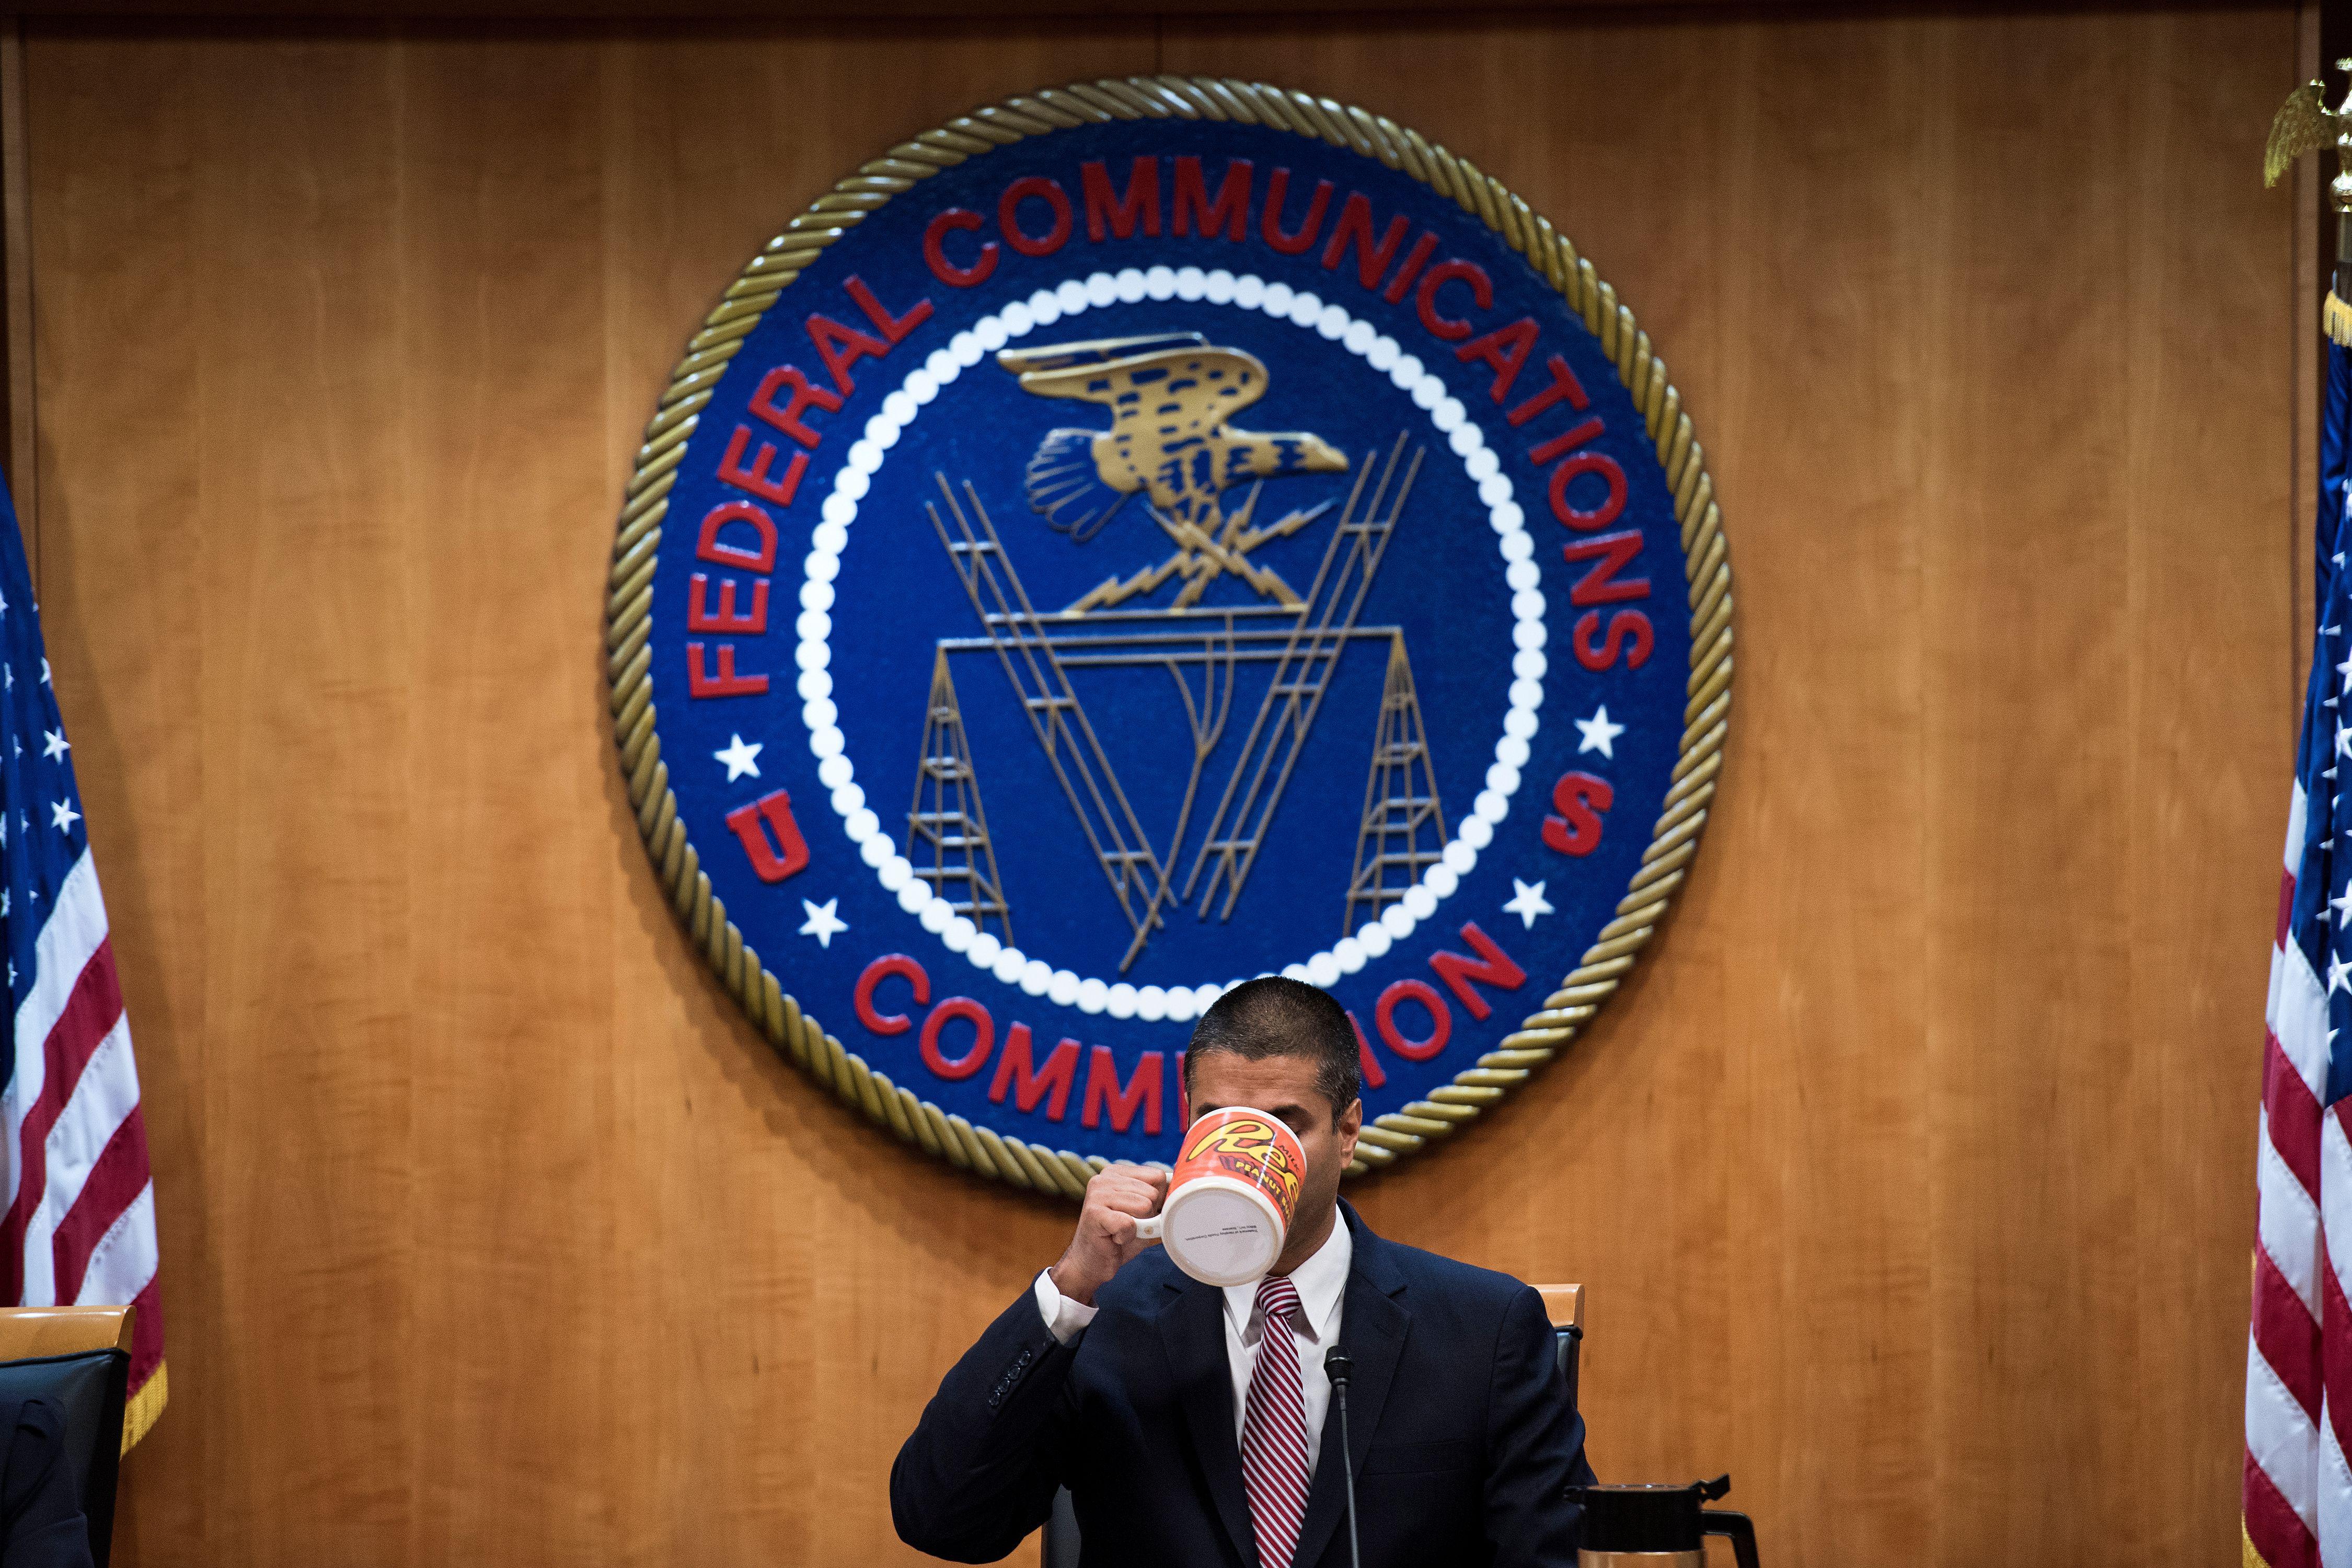 Ajit Pai sips from a giant Reese's mug beneath the seal of the FCC.